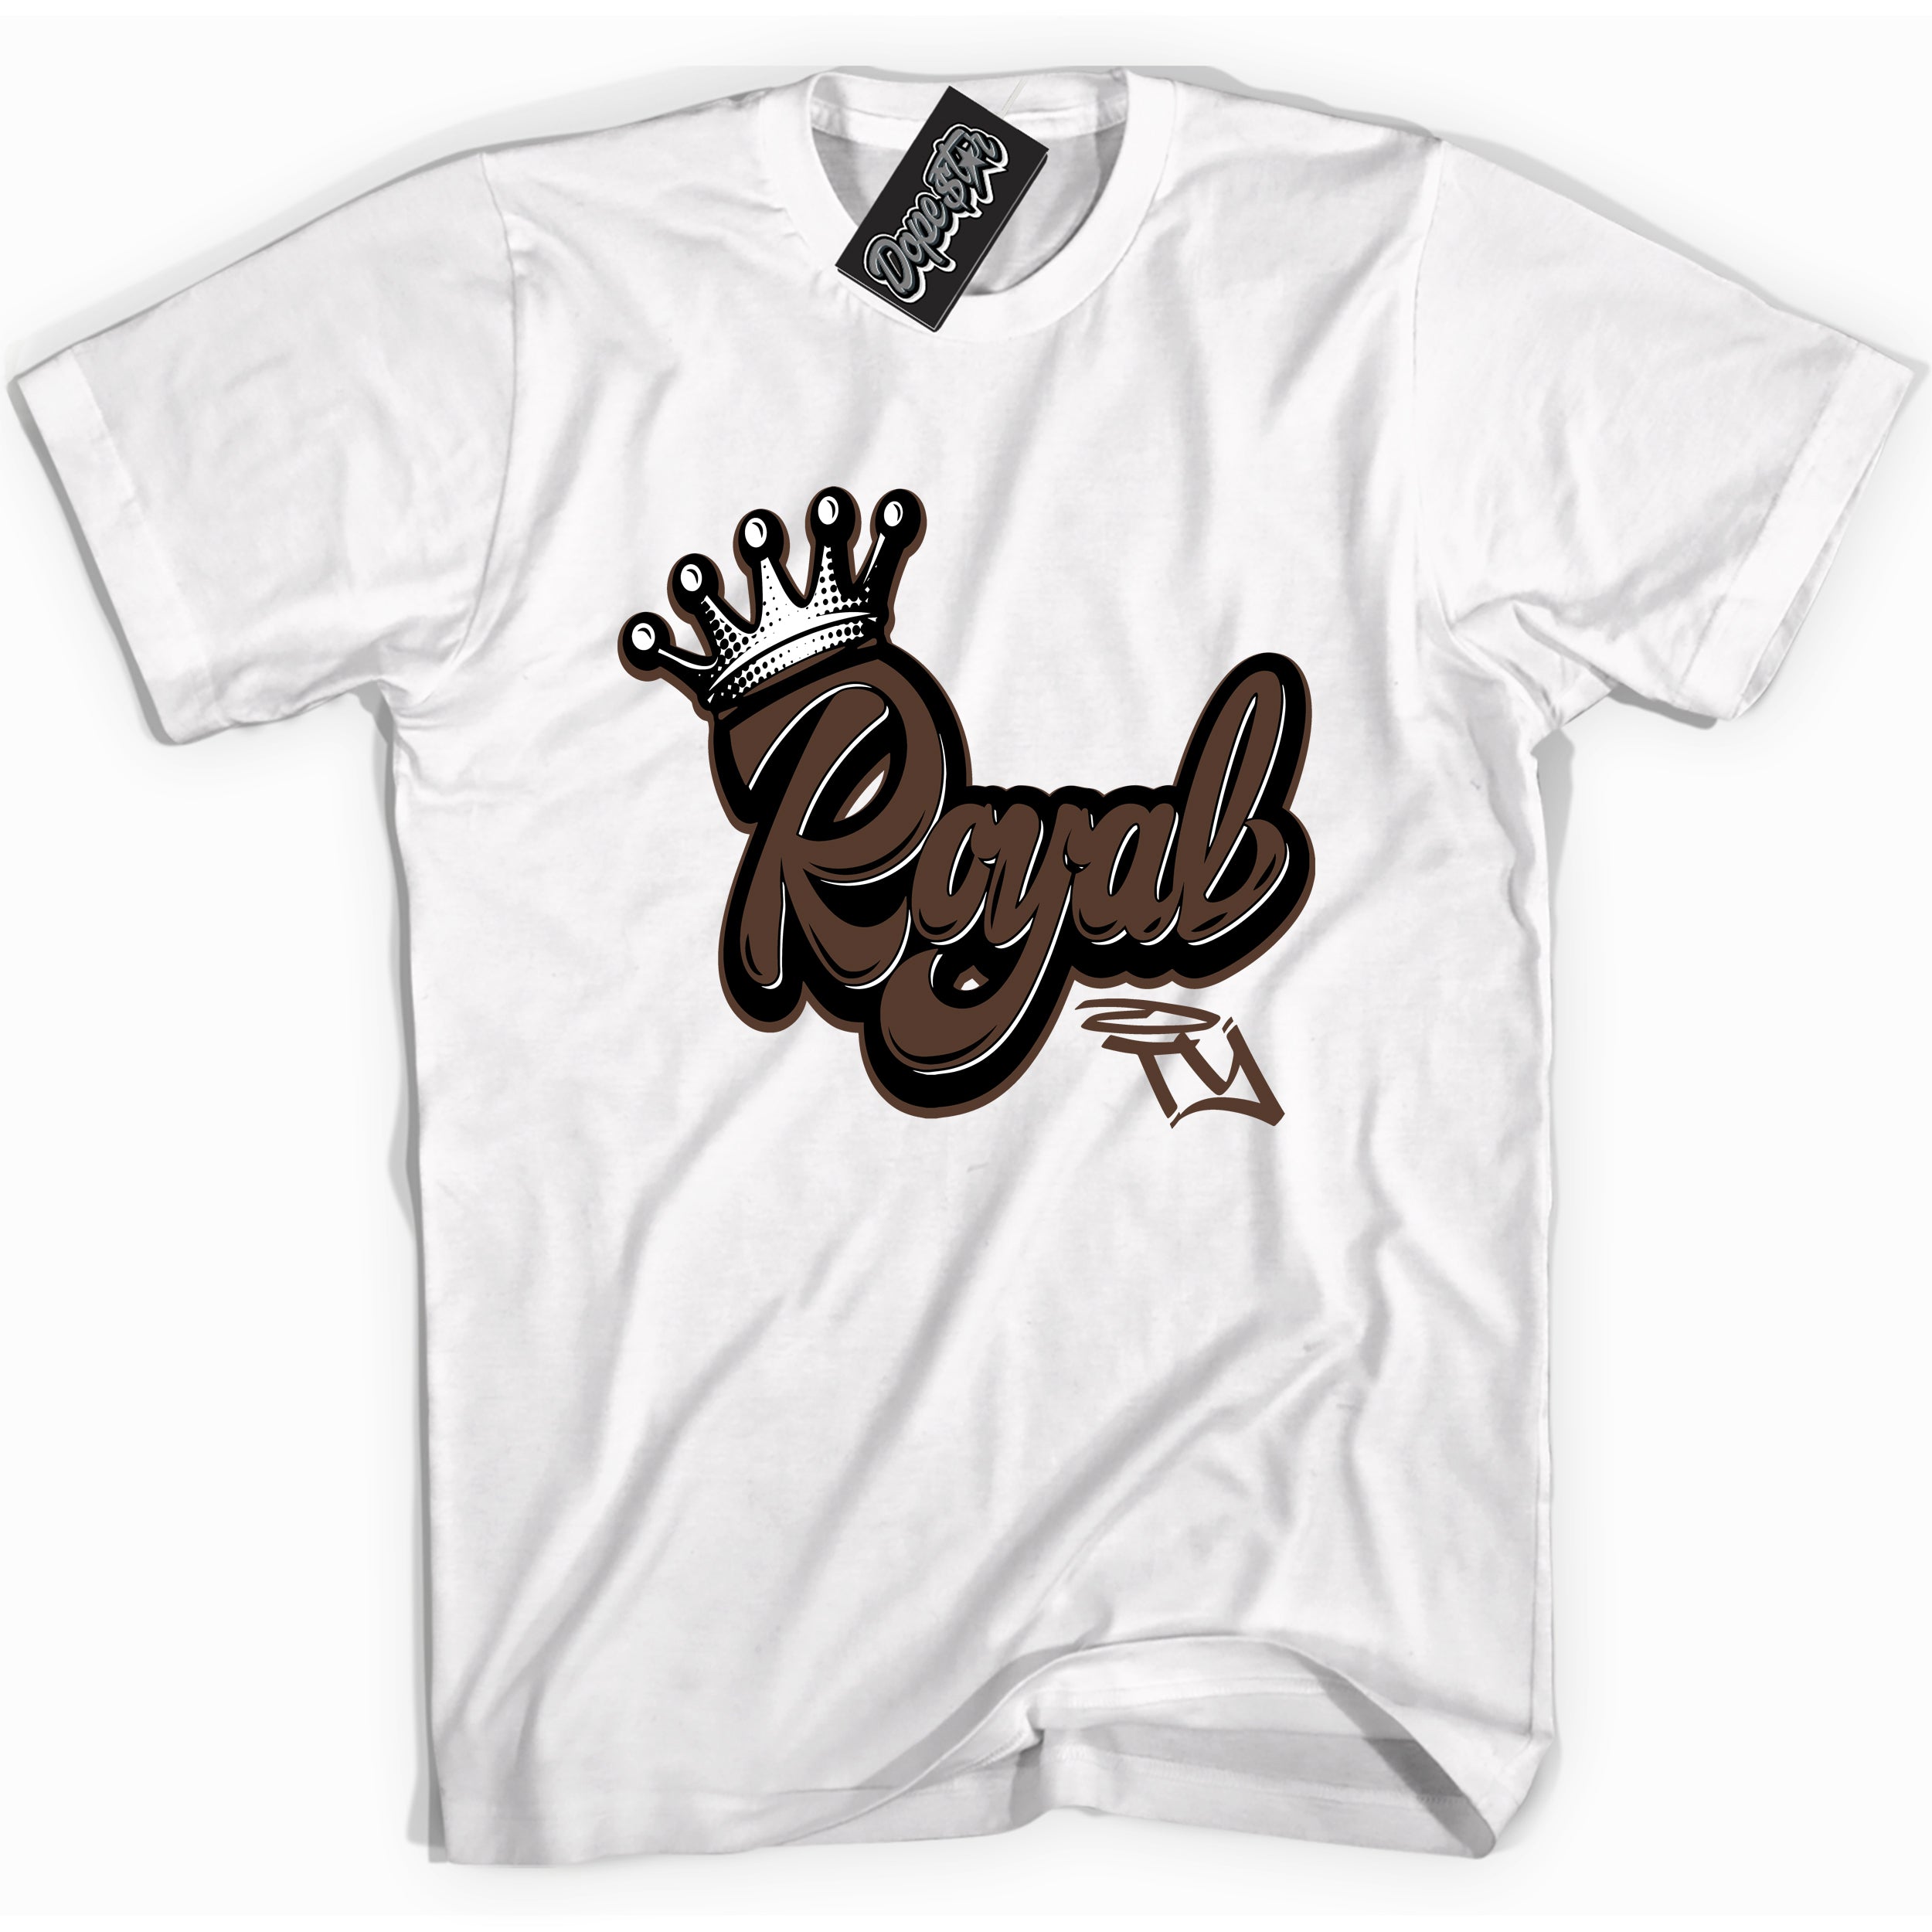 Cool White graphic tee with “ Royalty ” design, that perfectly matches Palomino 1s sneakers 